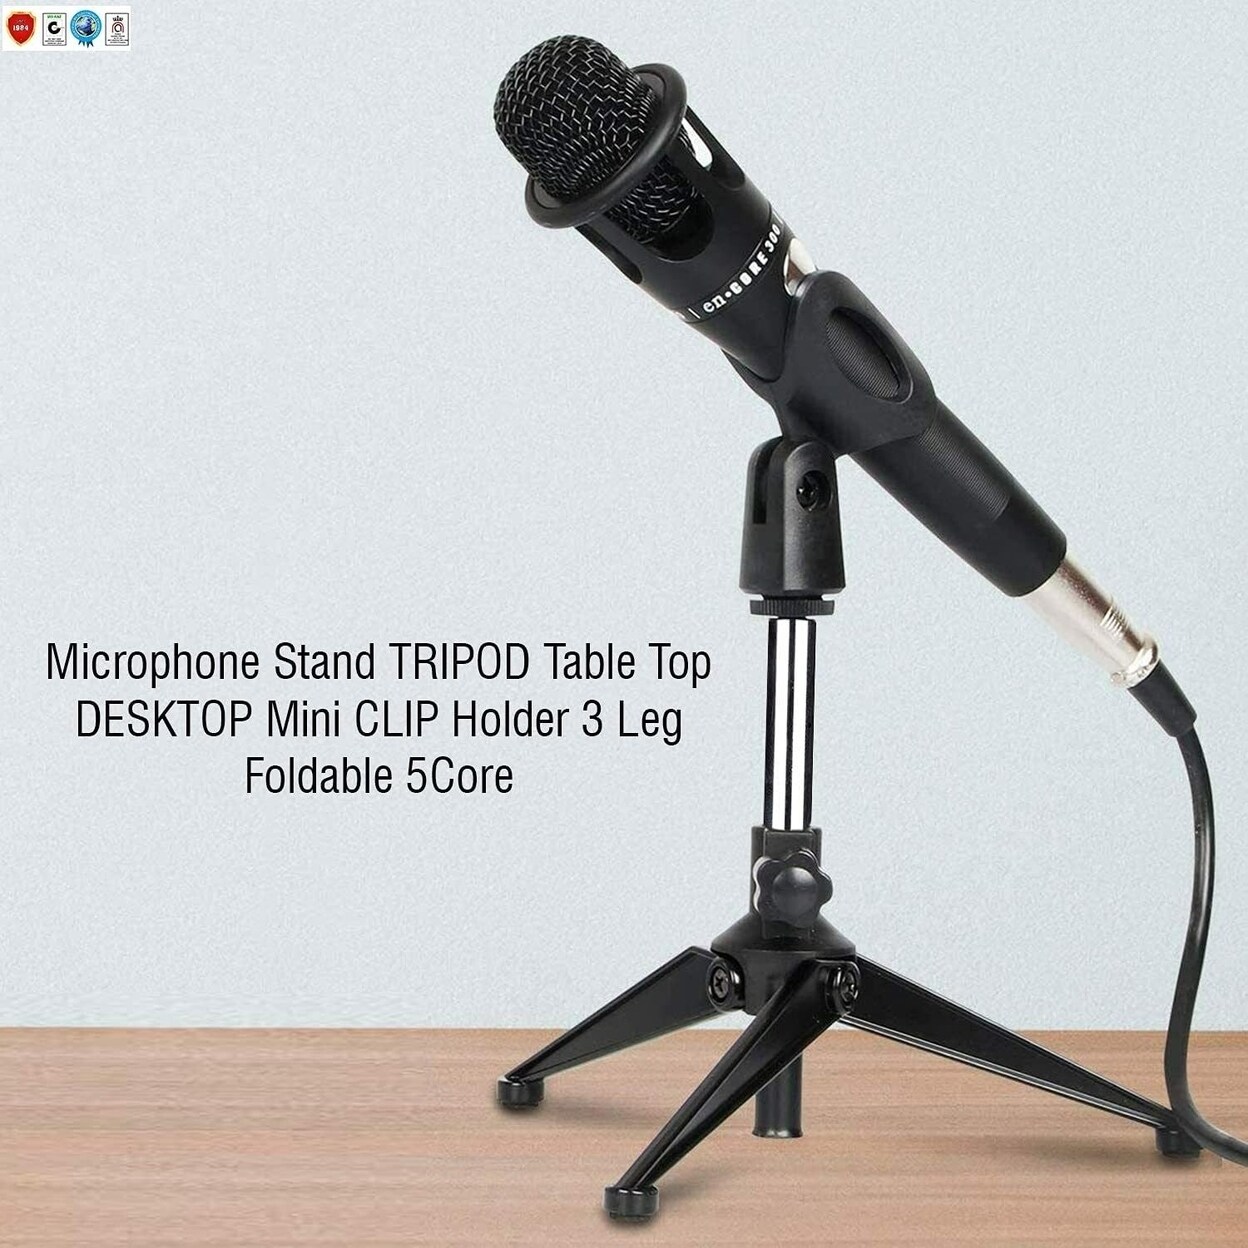 SKUSHOPS Mini Microphone Stand Tripod Universal Adjustable Desk Microphone Stand Portable Foldable Table Top Desktop Stand